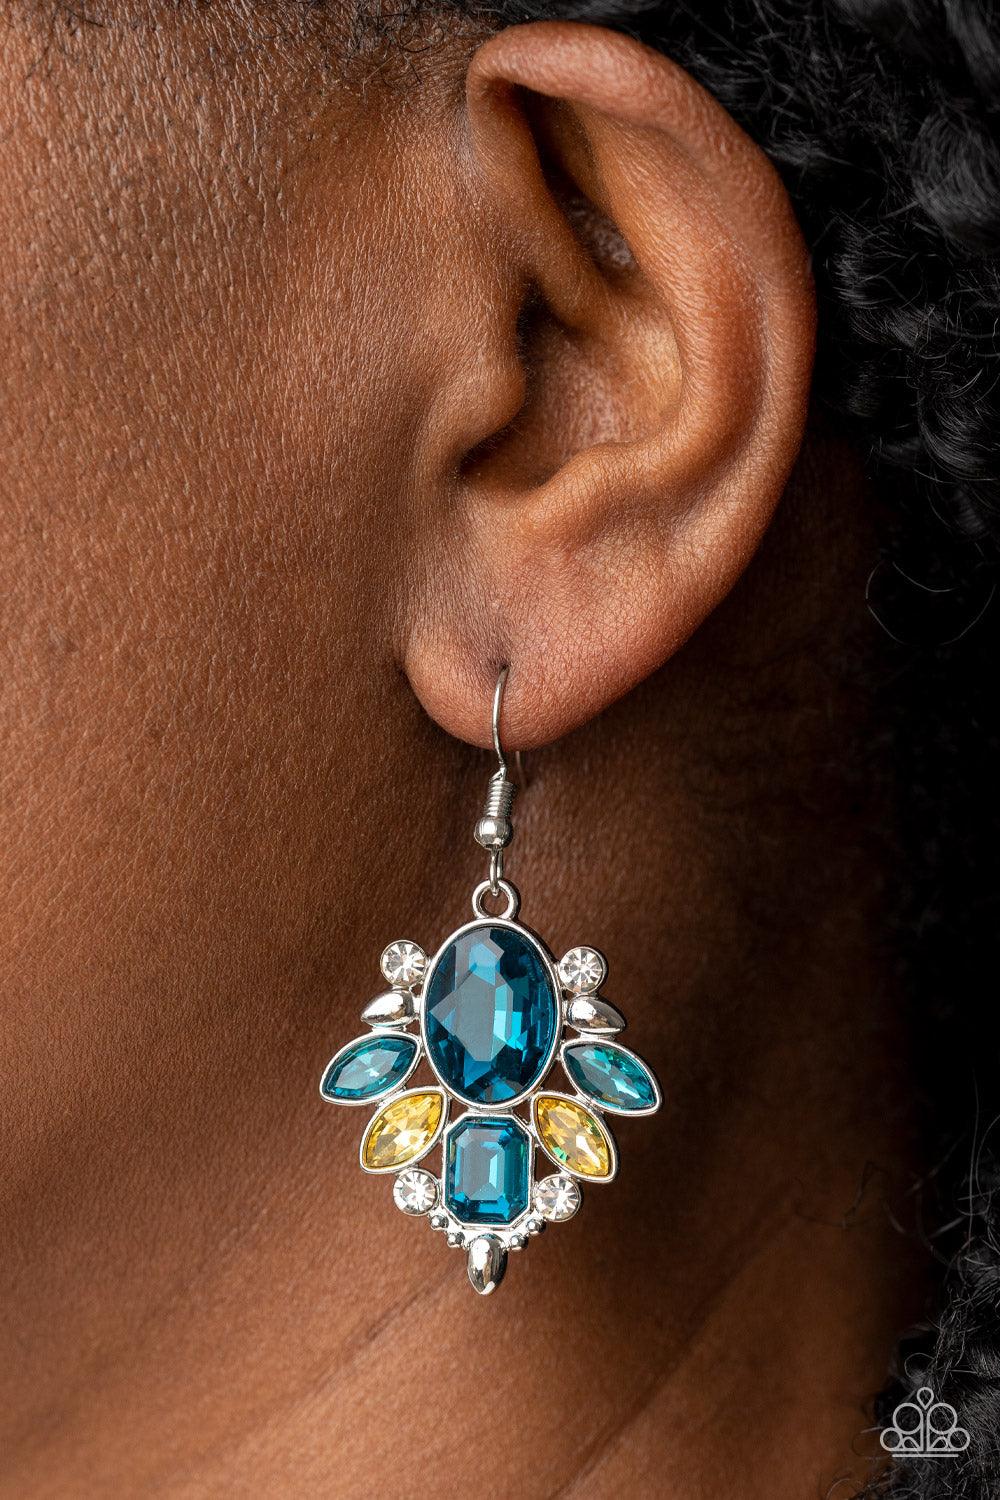 Paparazzi Accessories Glitzy Go-Getter - Multi A brilliant blue gem makes a sparkling centerpiece amidst a glitzy fringe of marquise, round, and emerald cut blue, yellow, and white rhinestones resulting in a timeless lure. Earring attaches to a standard f